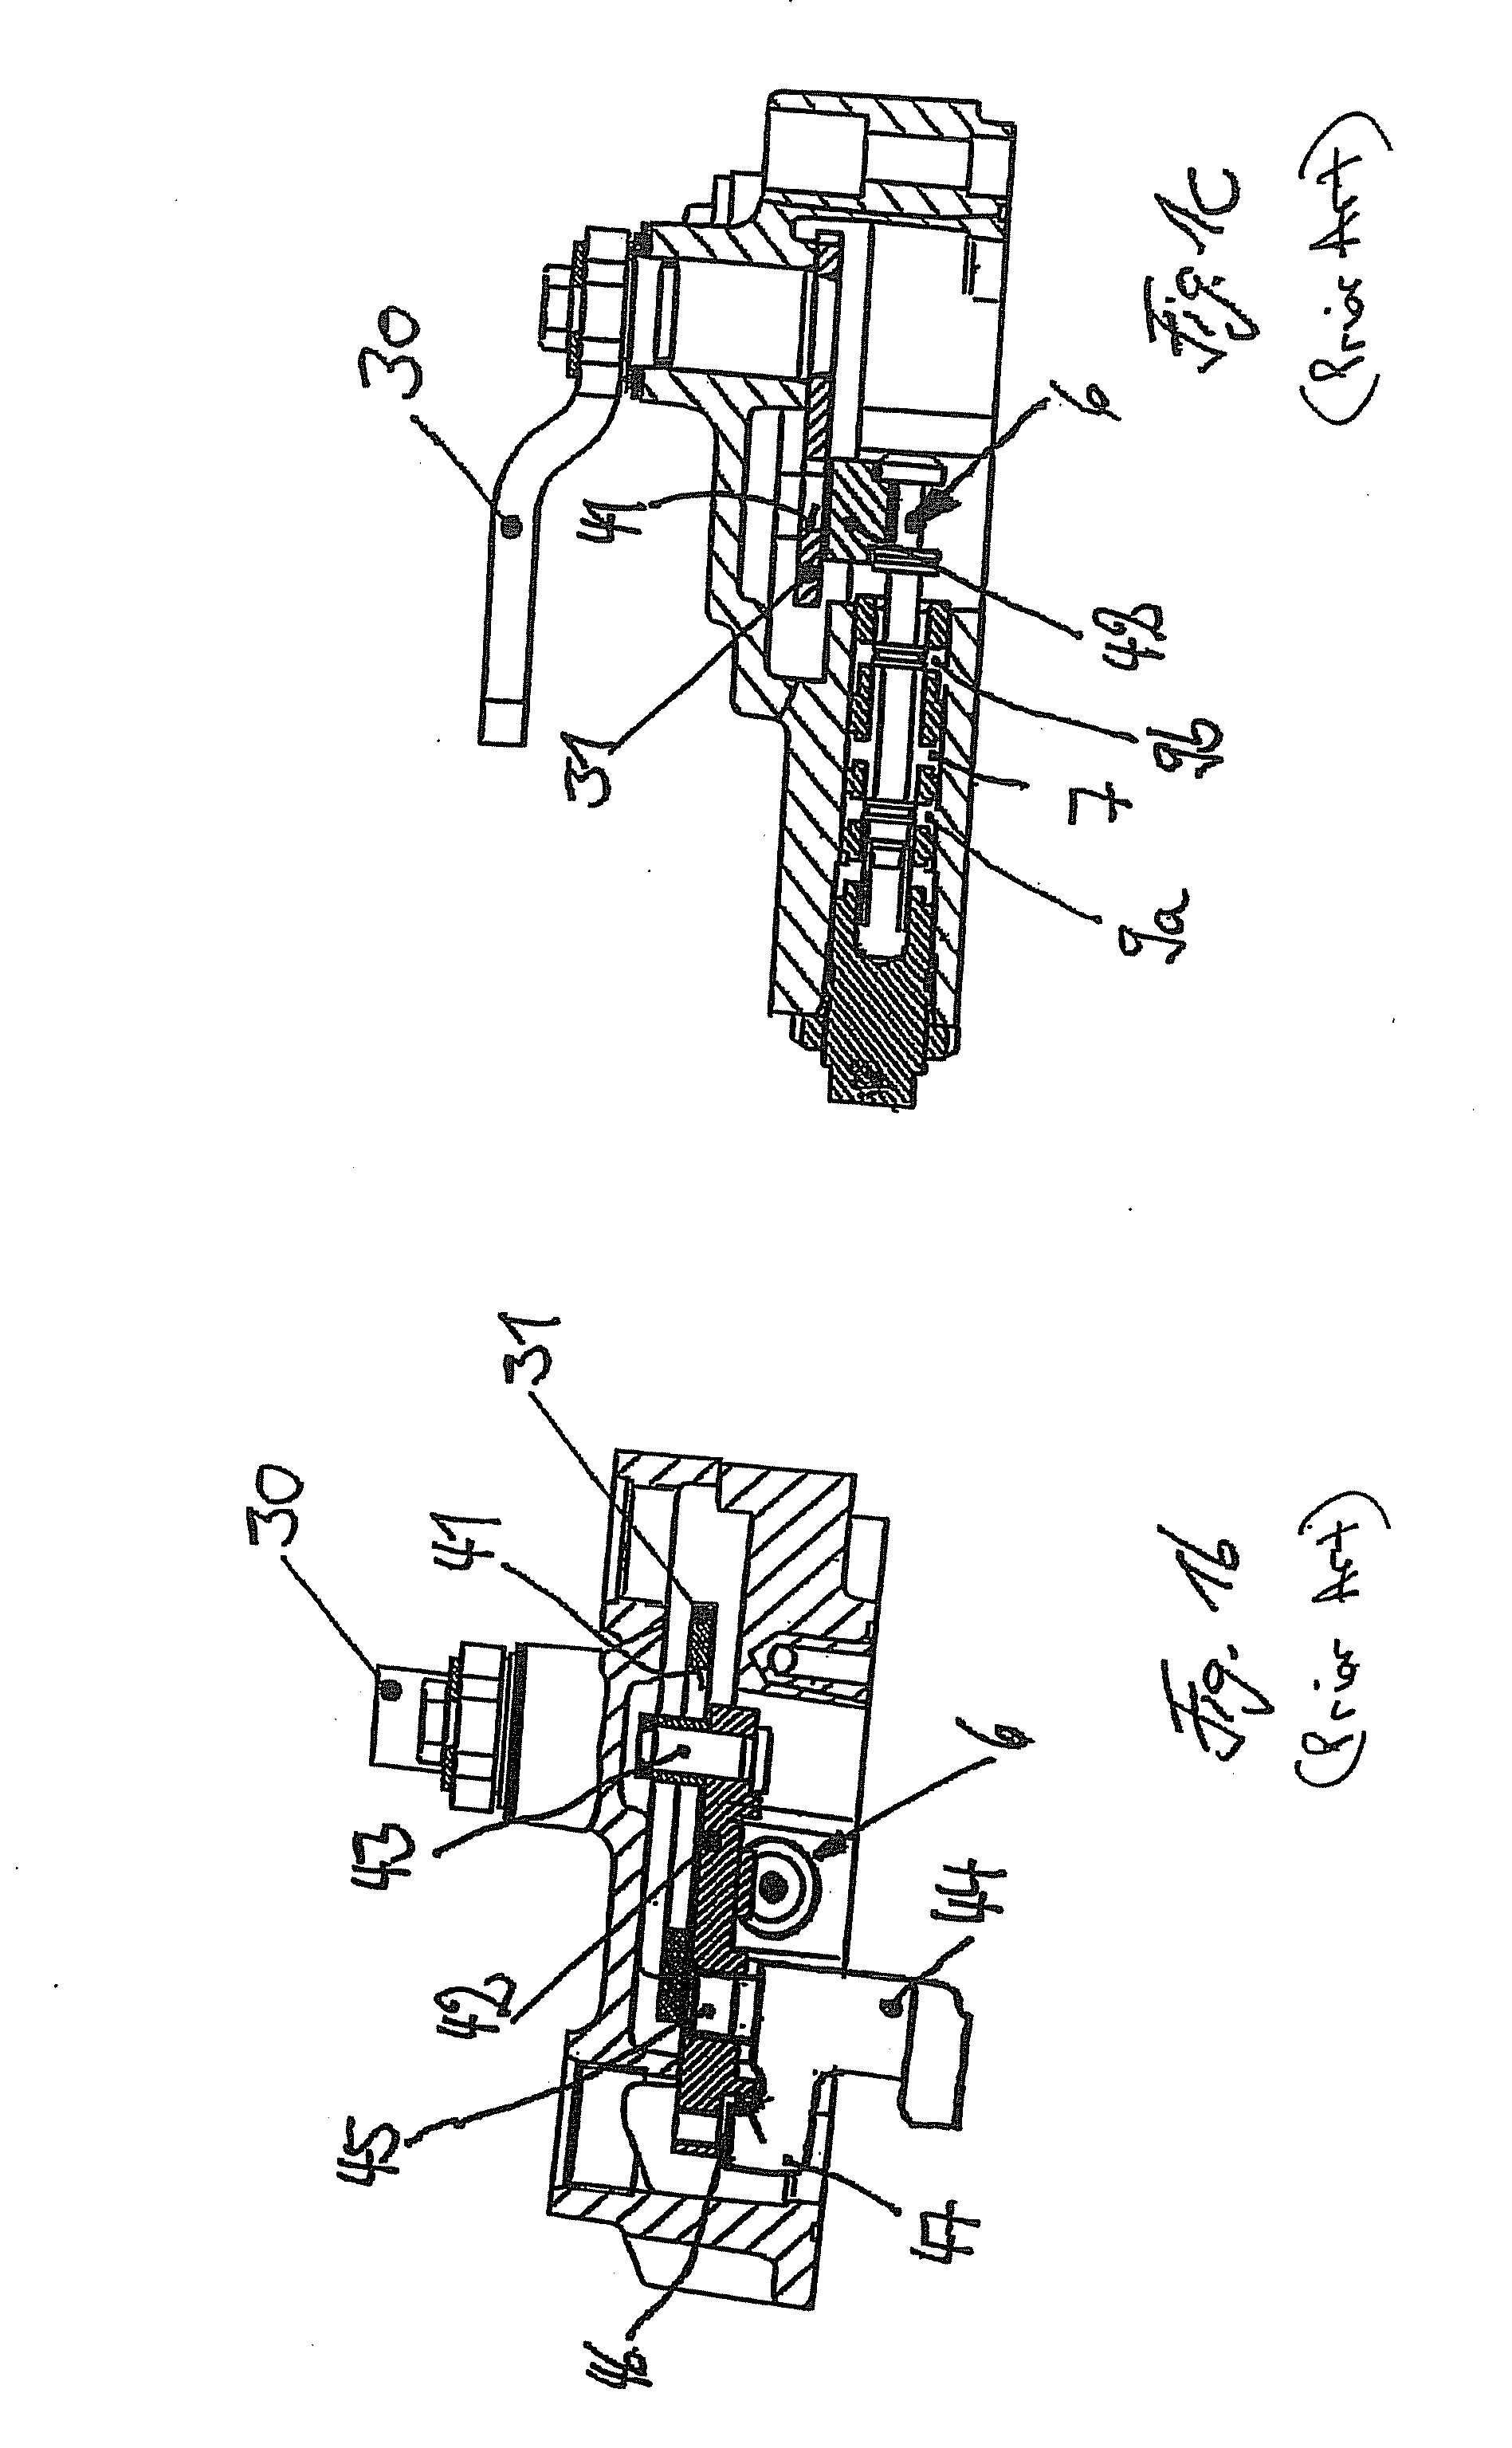 Hydrostatic Pump With A Mechanical Displacement Volume Control